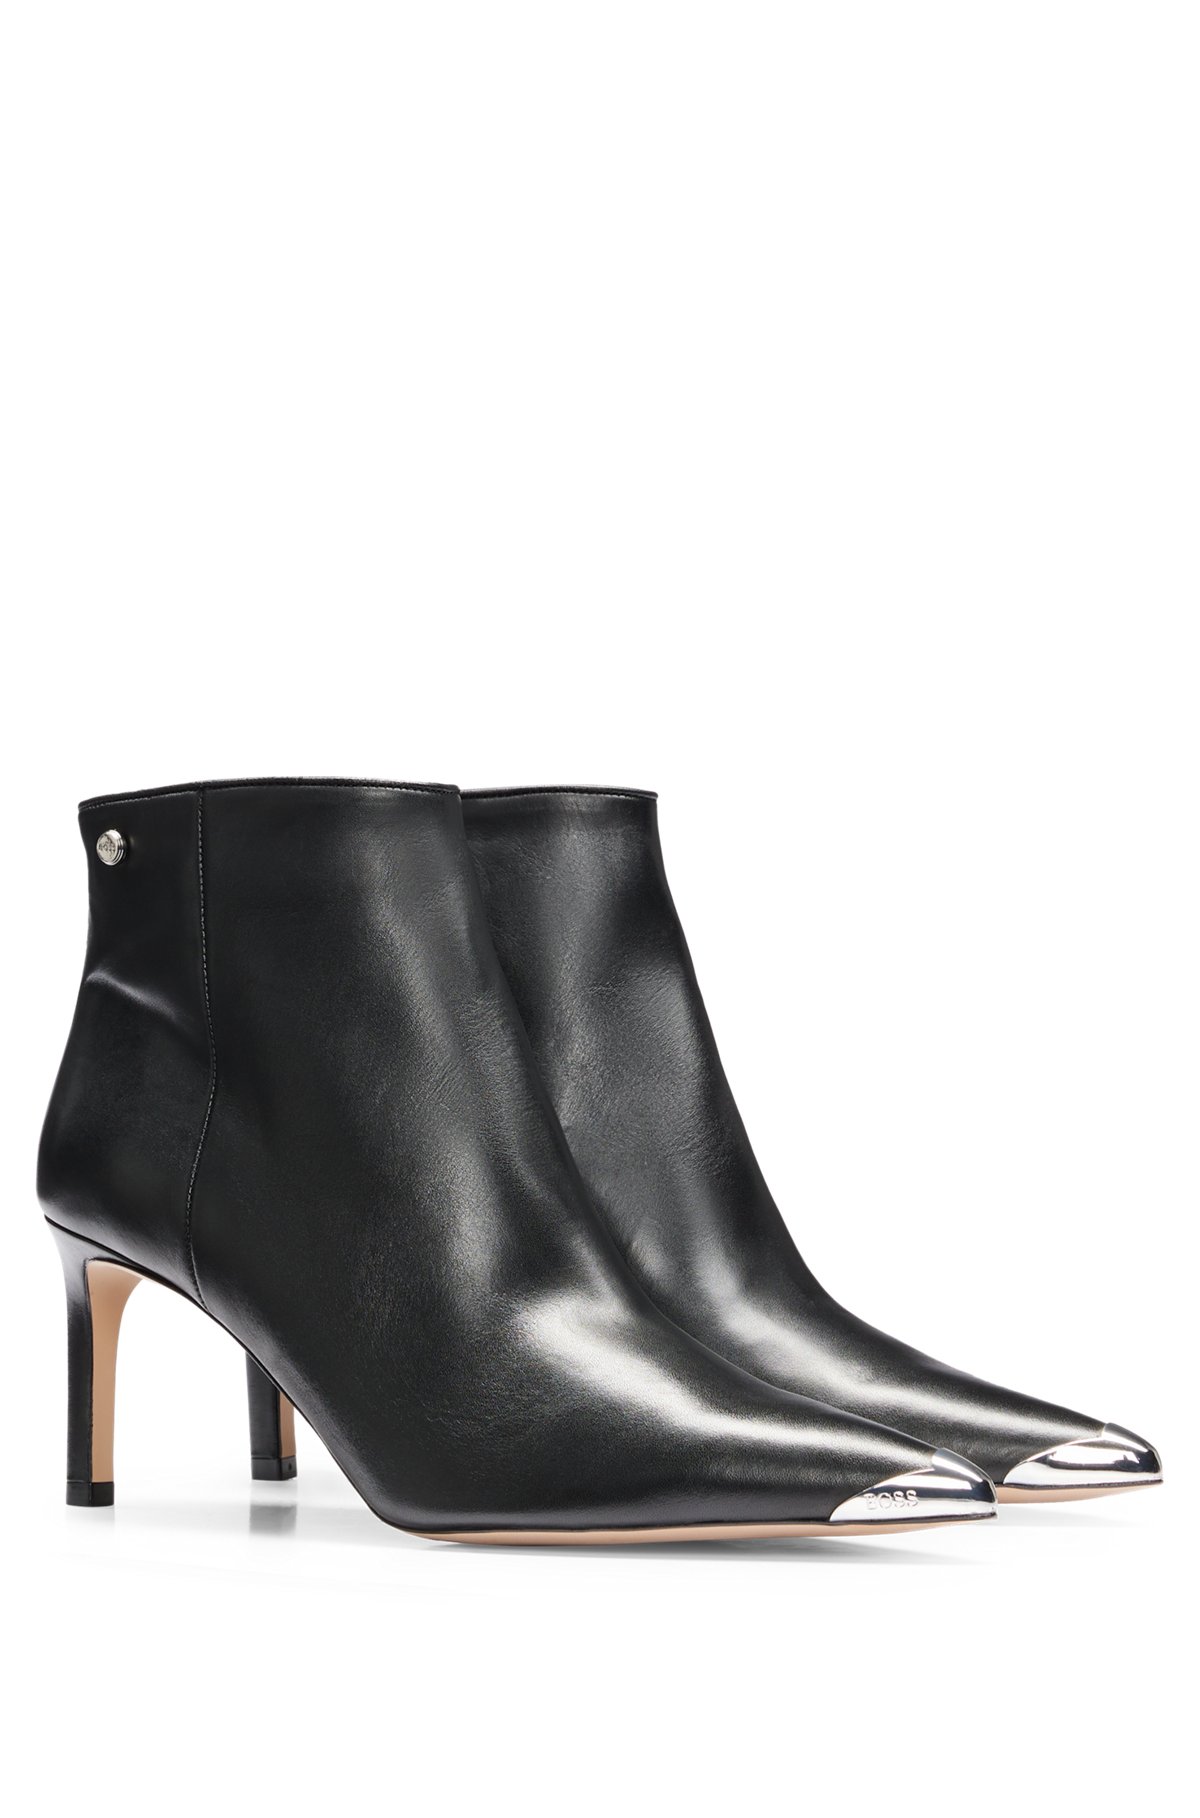 Napa-leather heeled boots with metal toe tip, Black